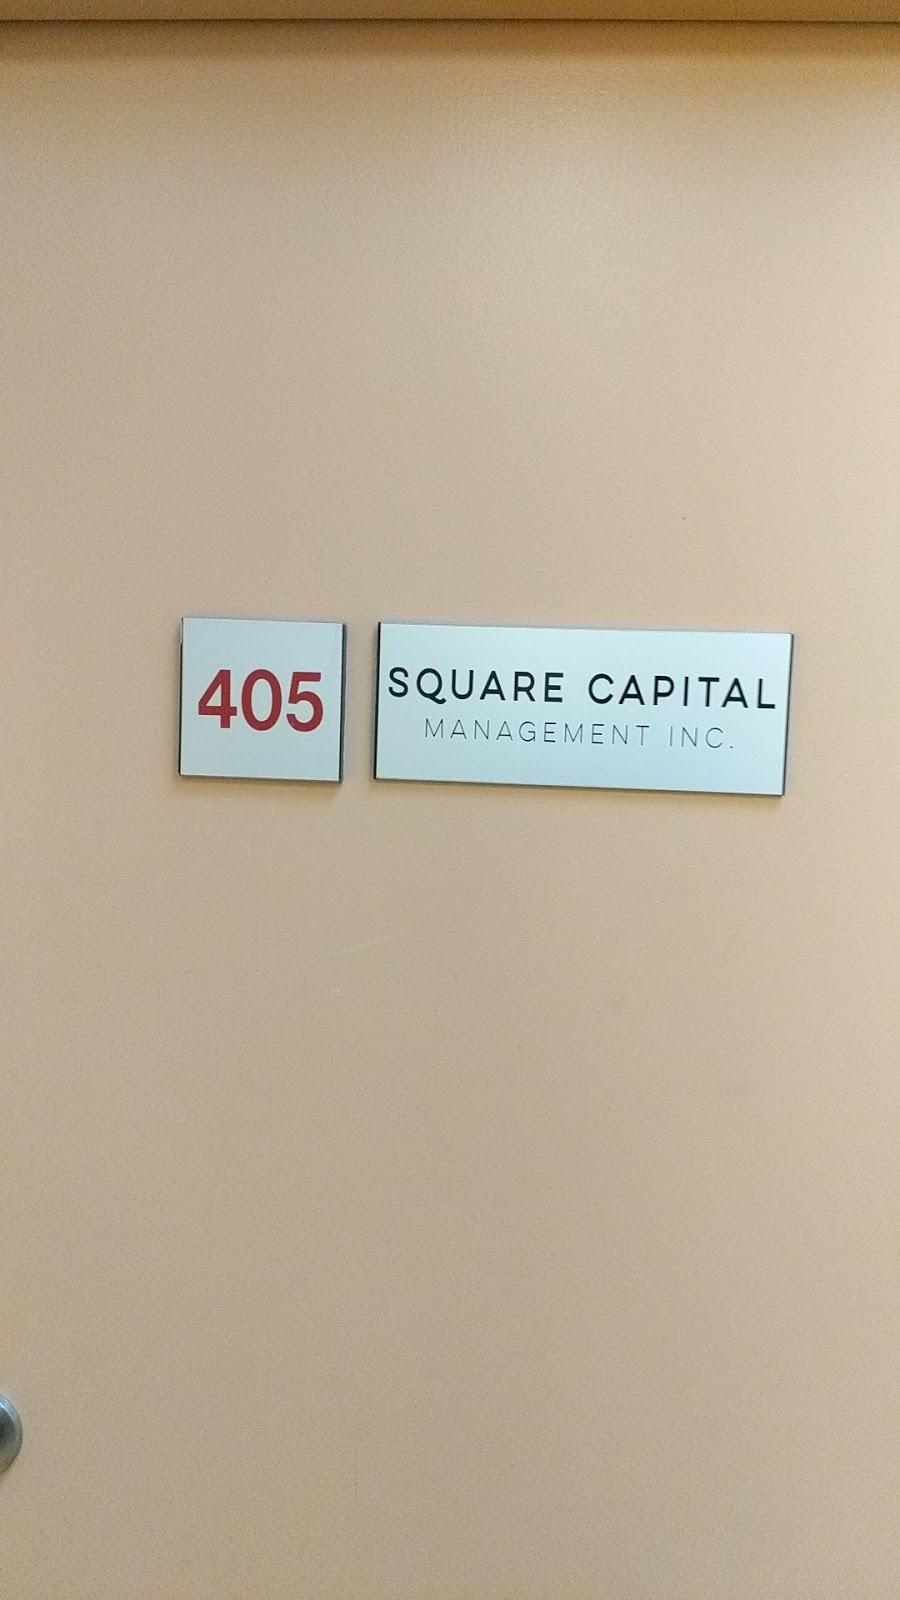 Square Capital Management Inc. | 3852 Finch Ave E #405, Scarborough, ON M1T 3T9, Canada | Phone: (416) 901-9525